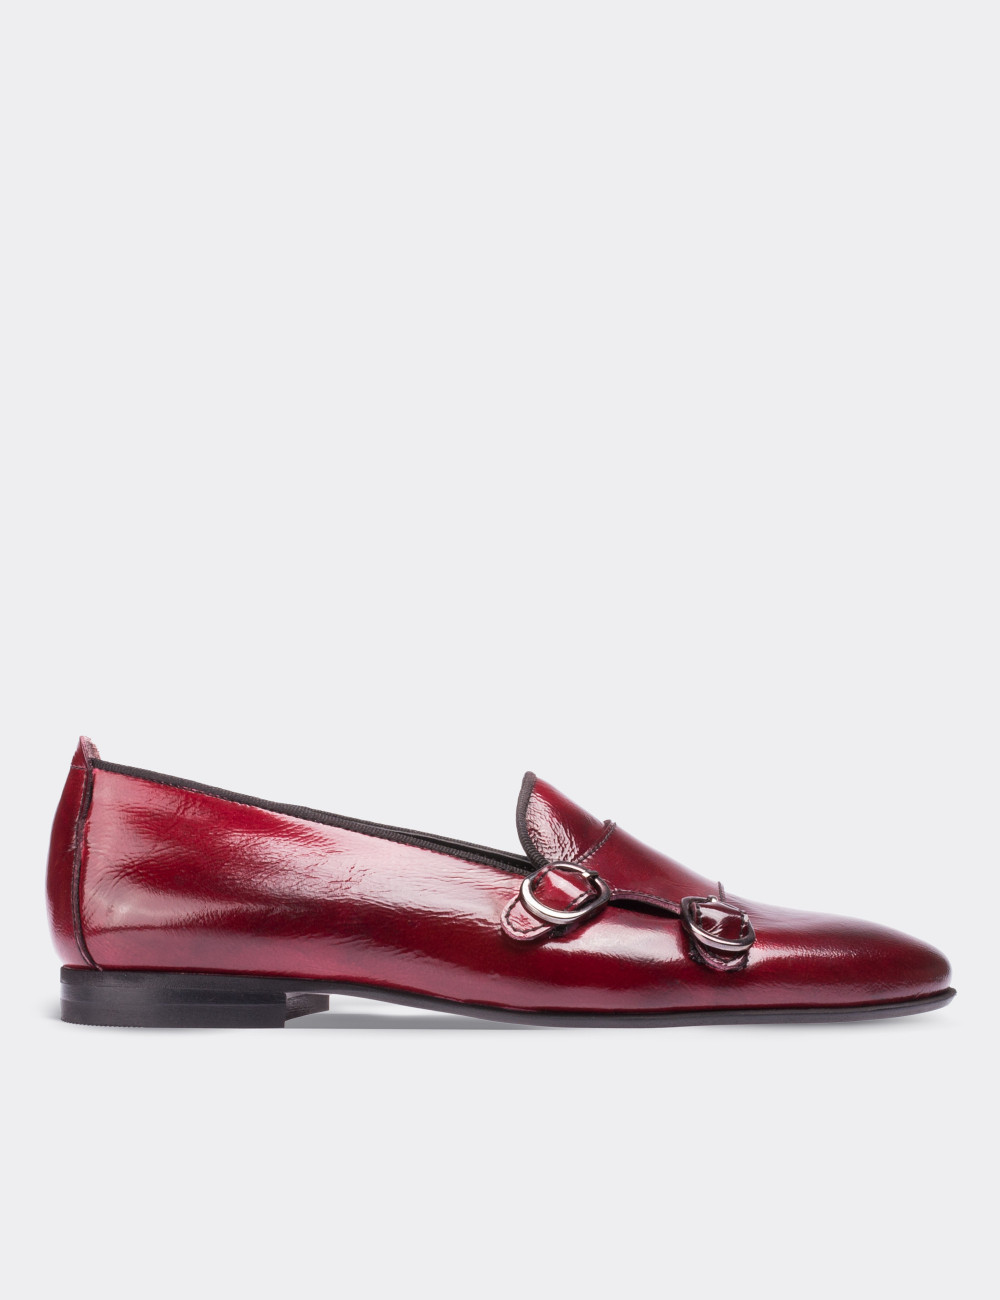 Burgundy Patent Leather Loafers - 01611ZBRDM01